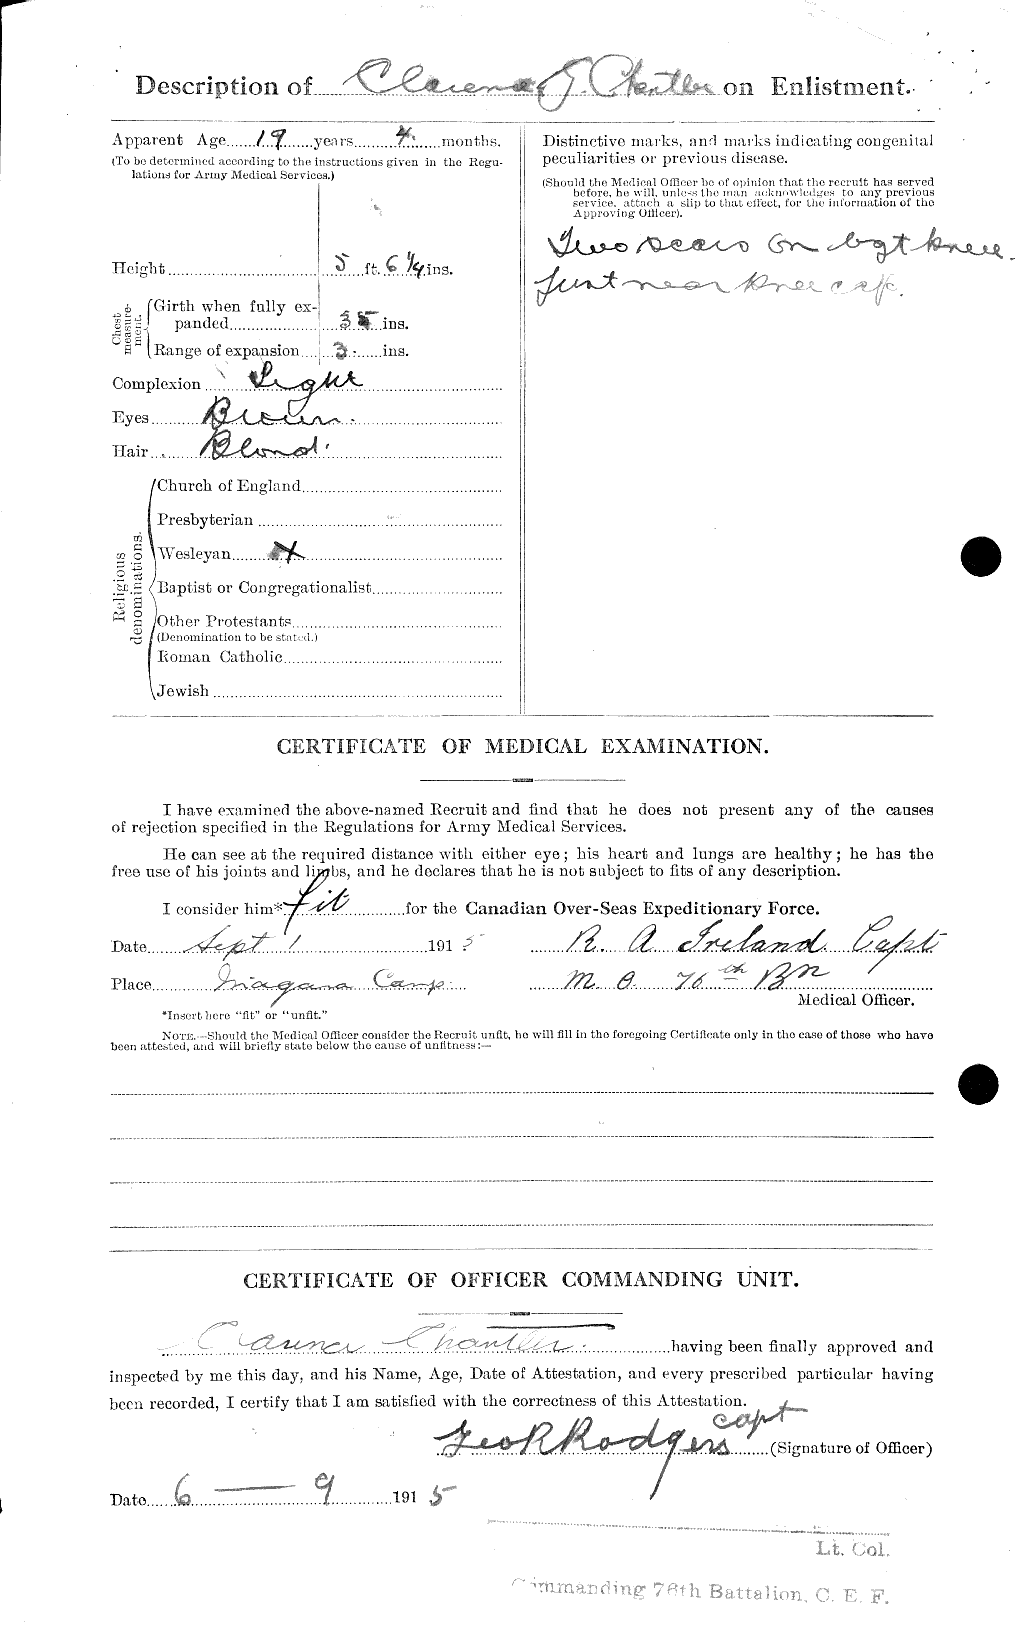 Personnel Records of the First World War - CEF 013885b